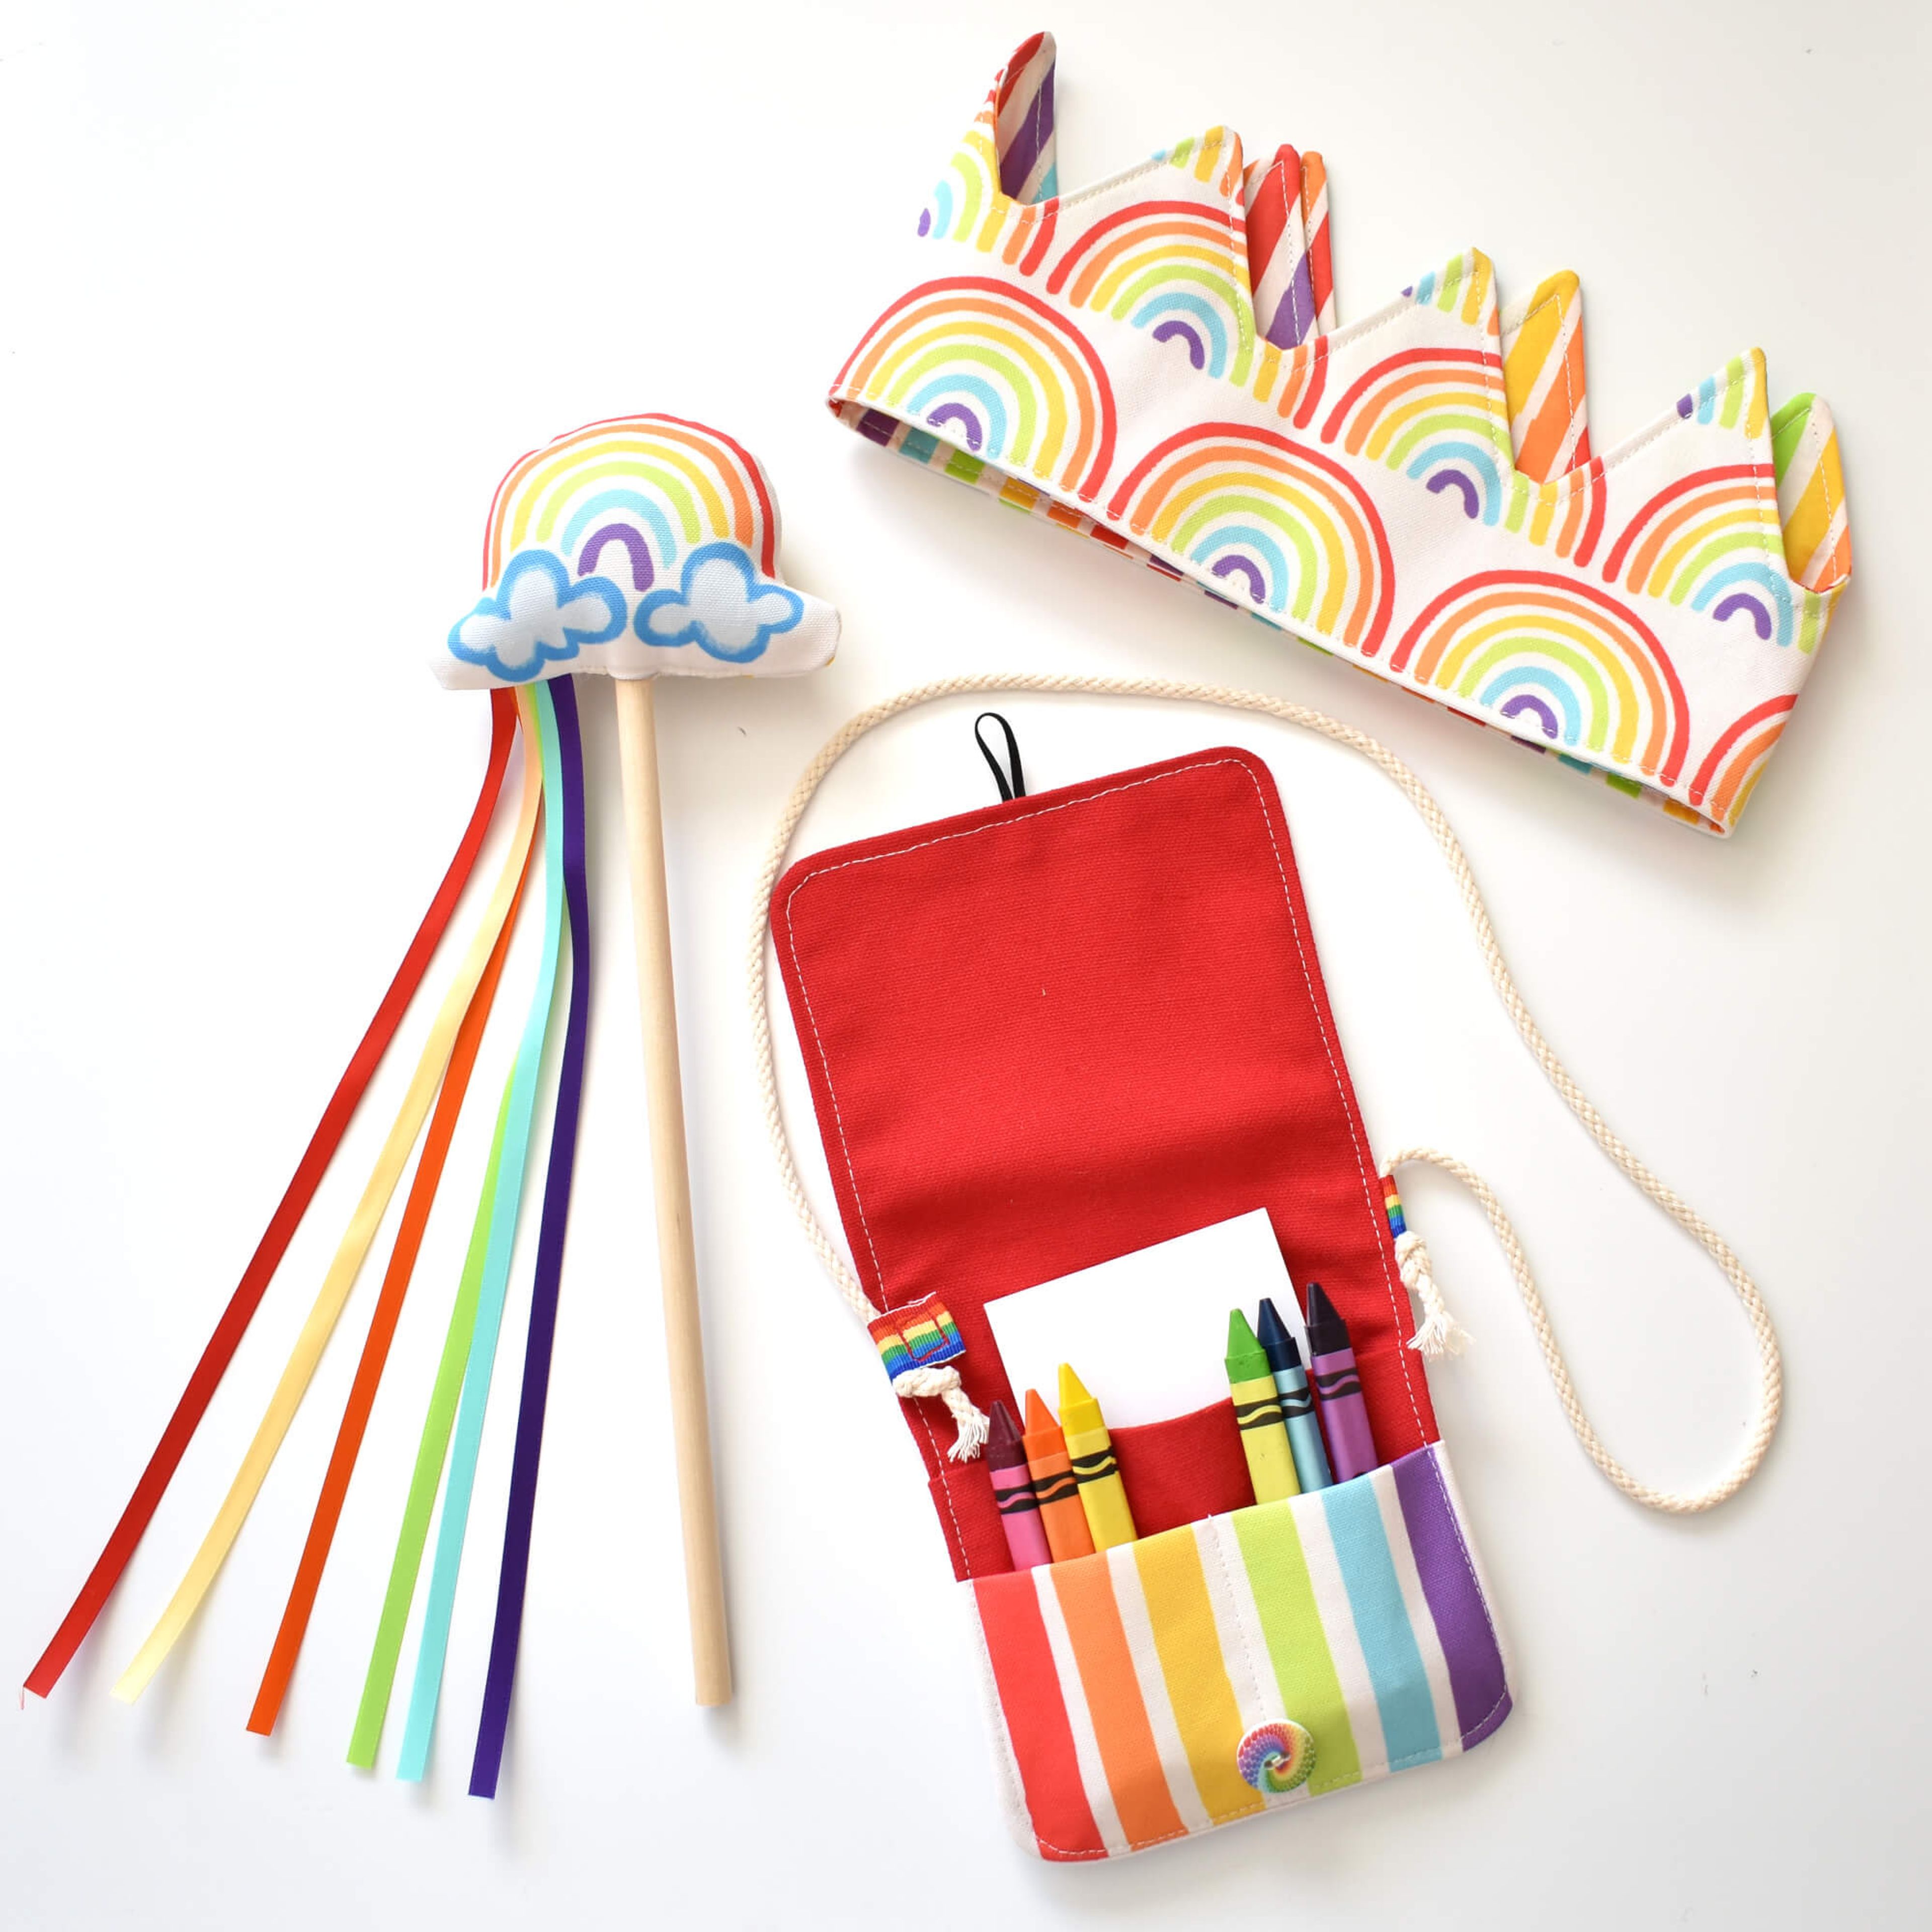 Rainbow Gifts: "Adorable! Perfect for my daughters costume!"